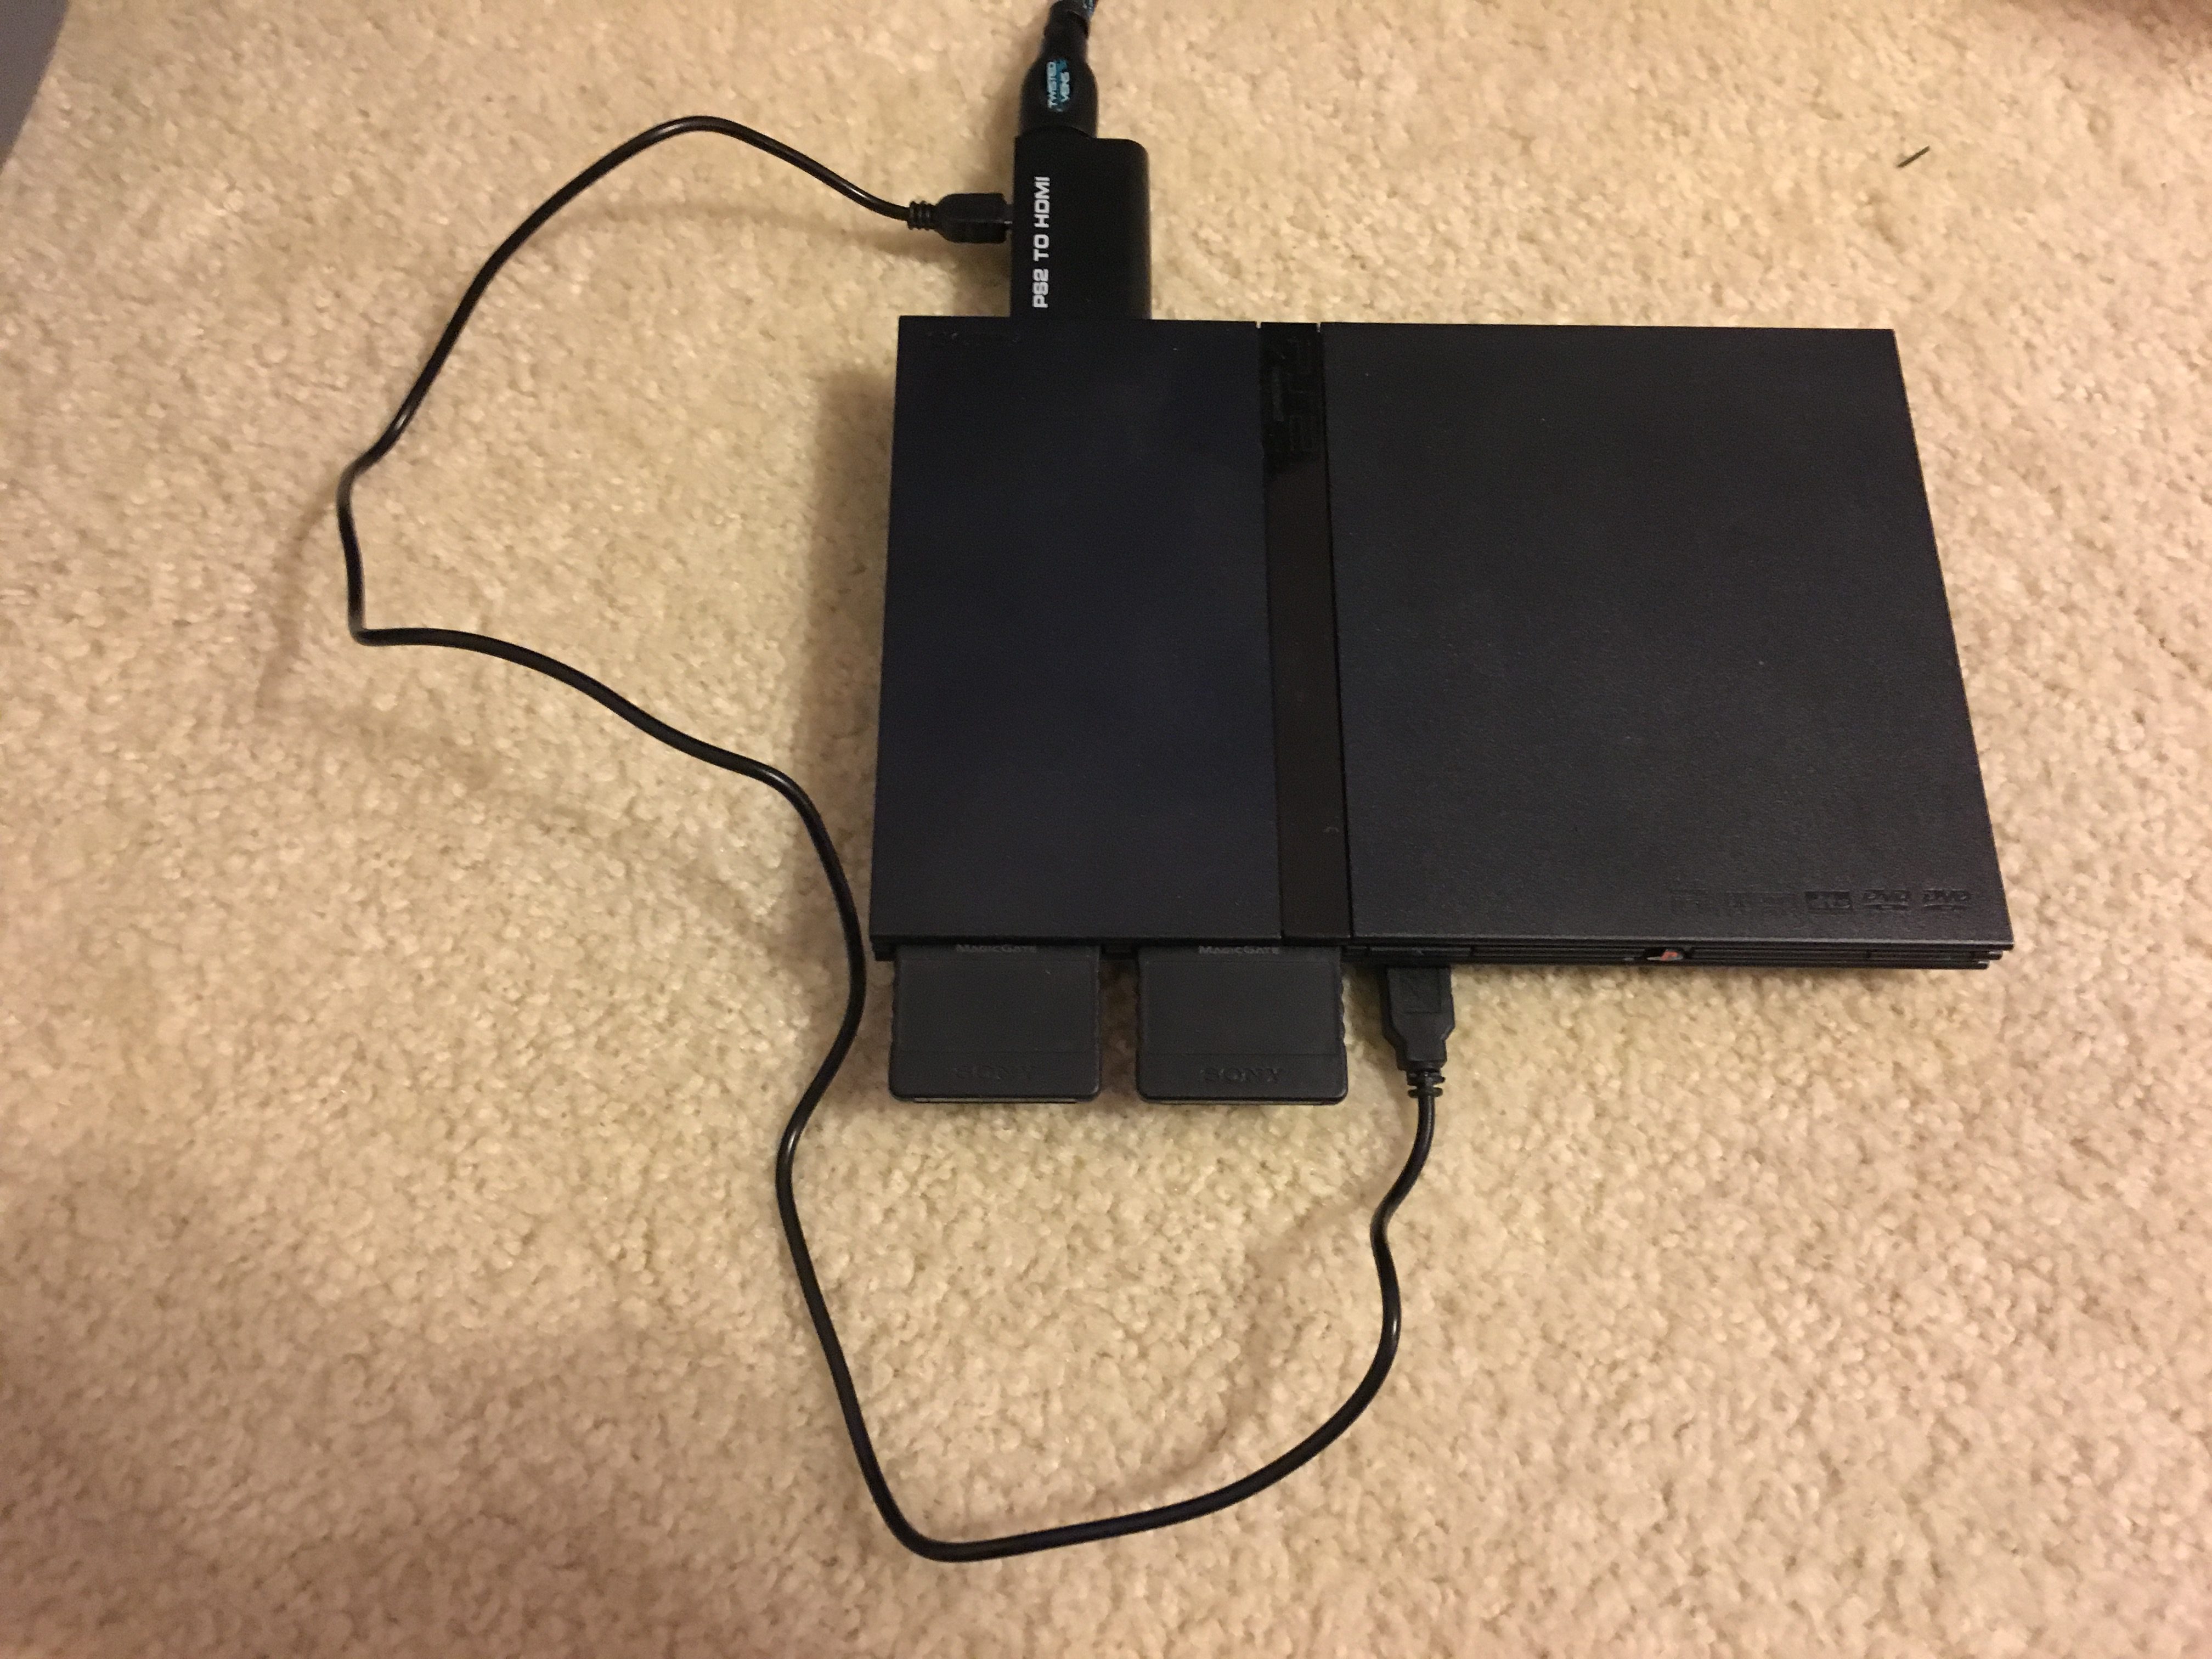 ps2 cords to tv